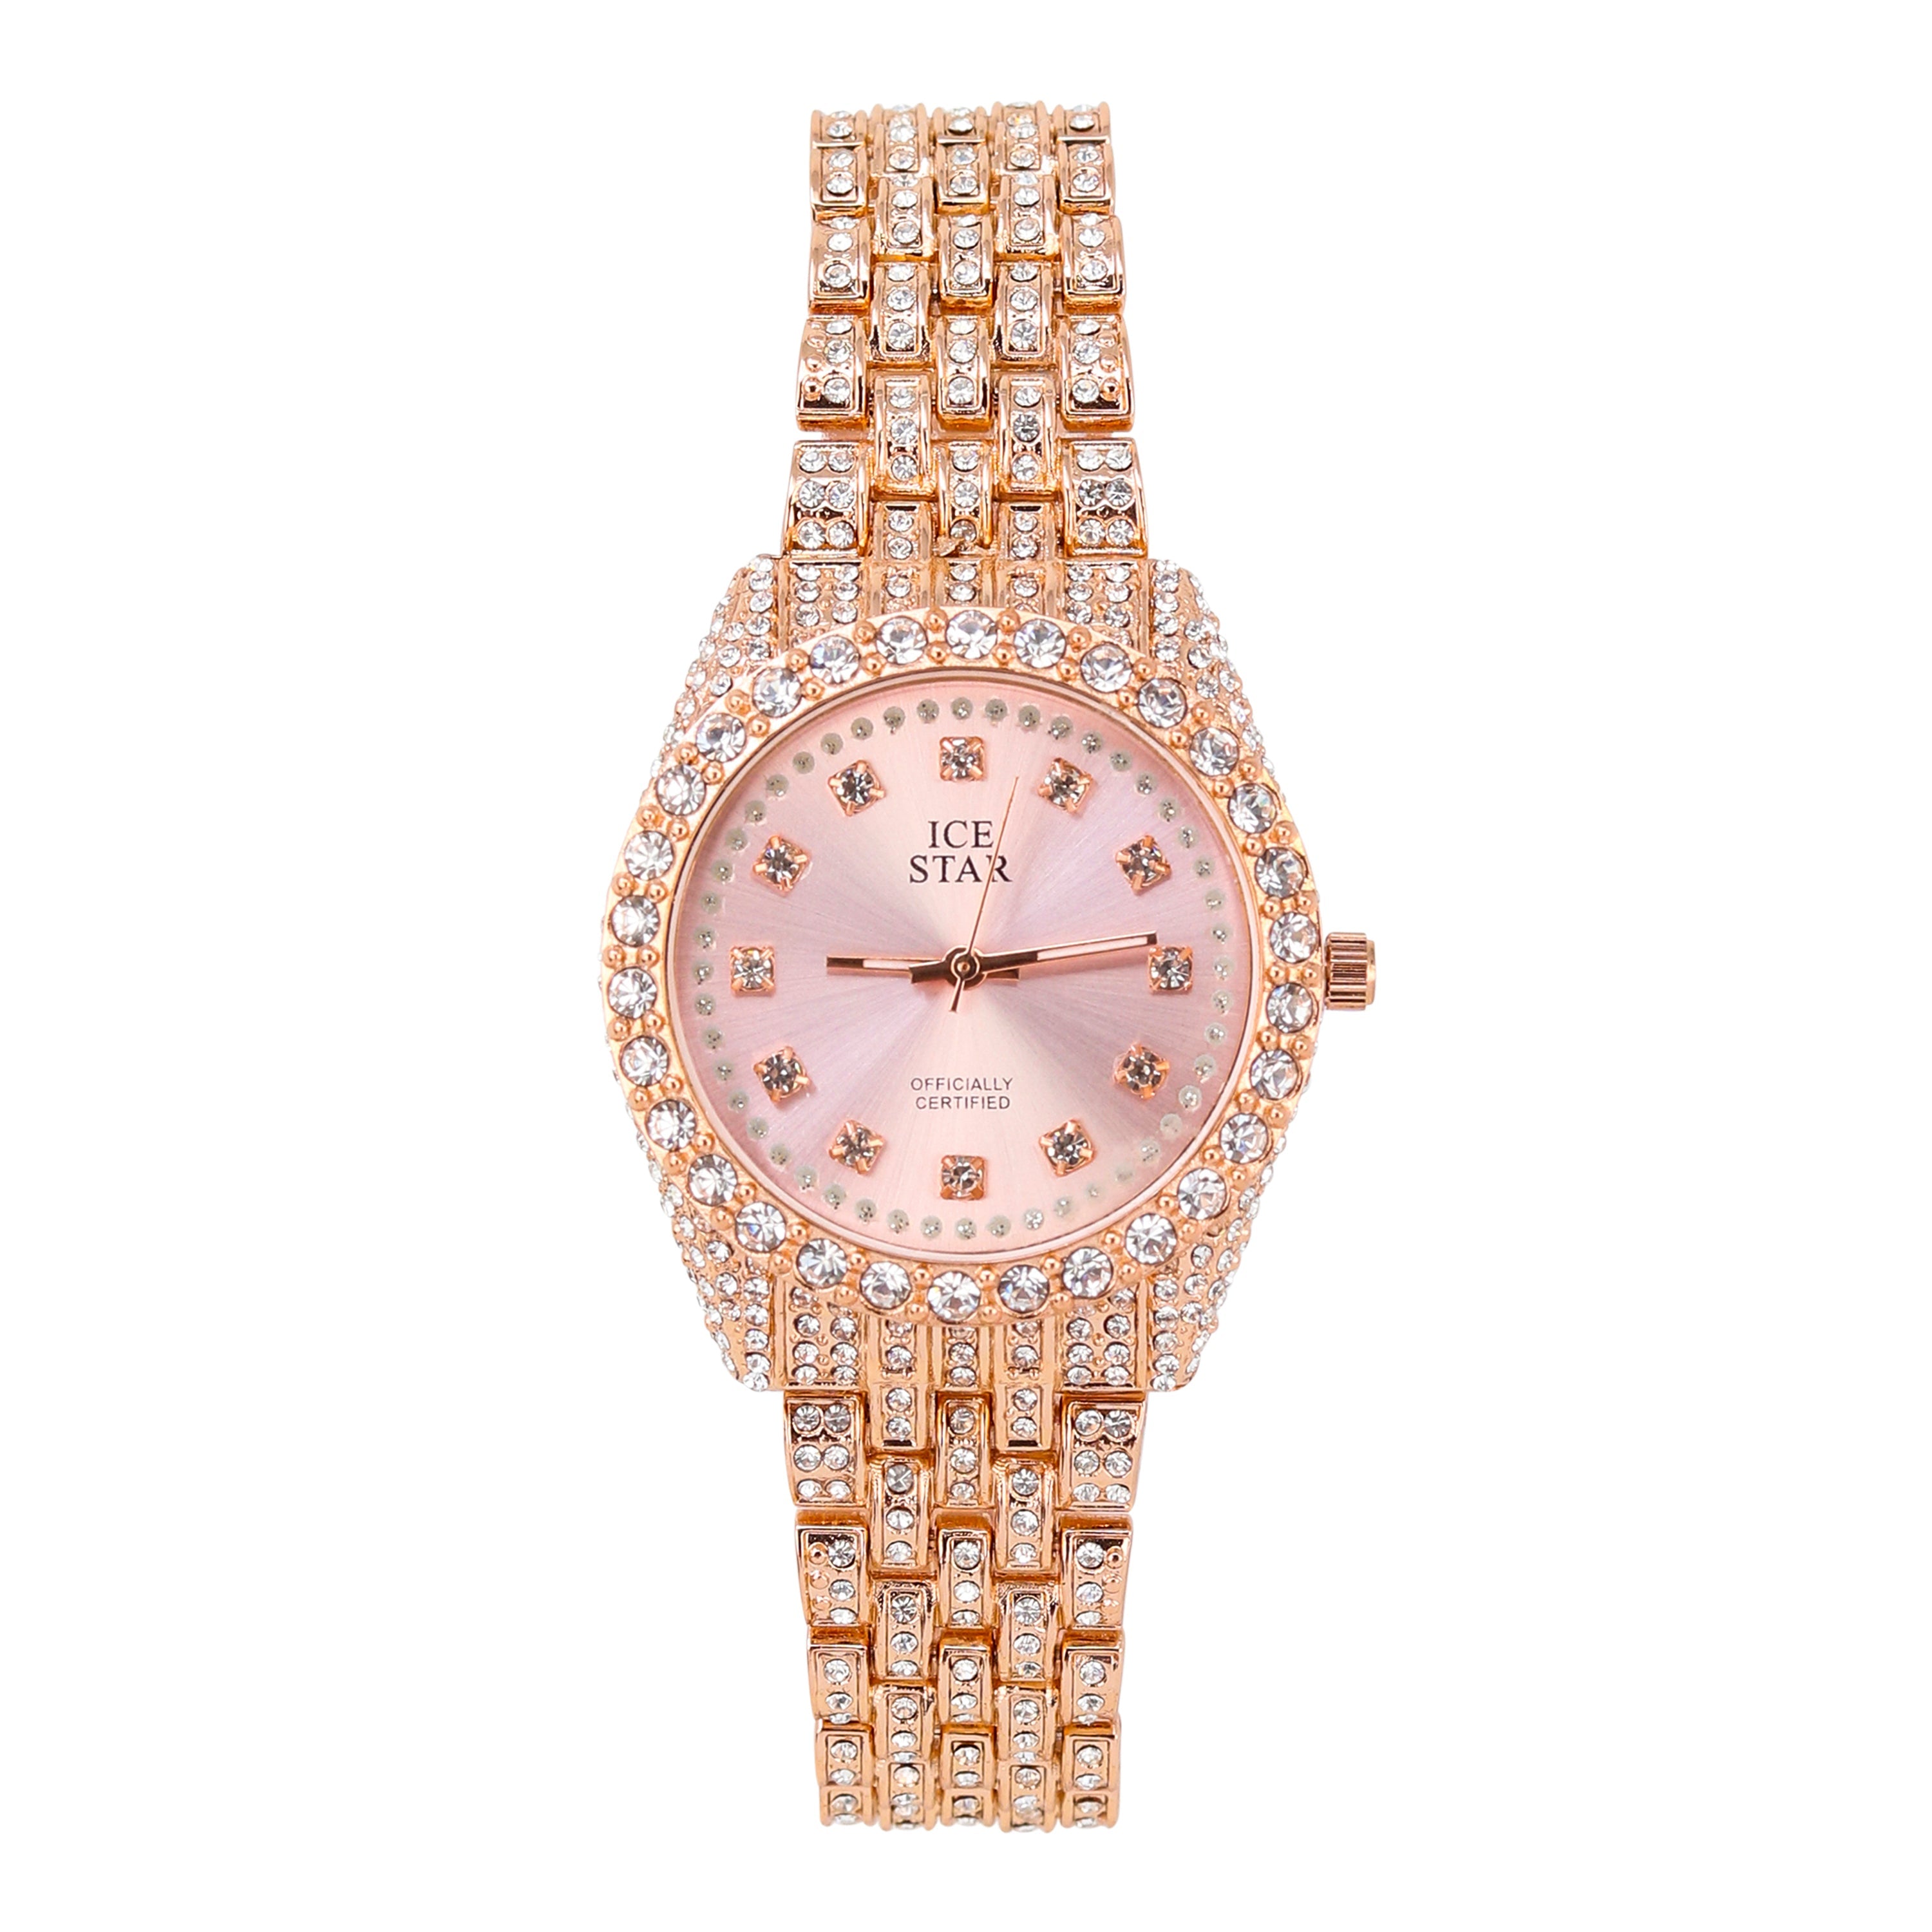 Women's Round Iced Out  Watch 32mm Rose Gold